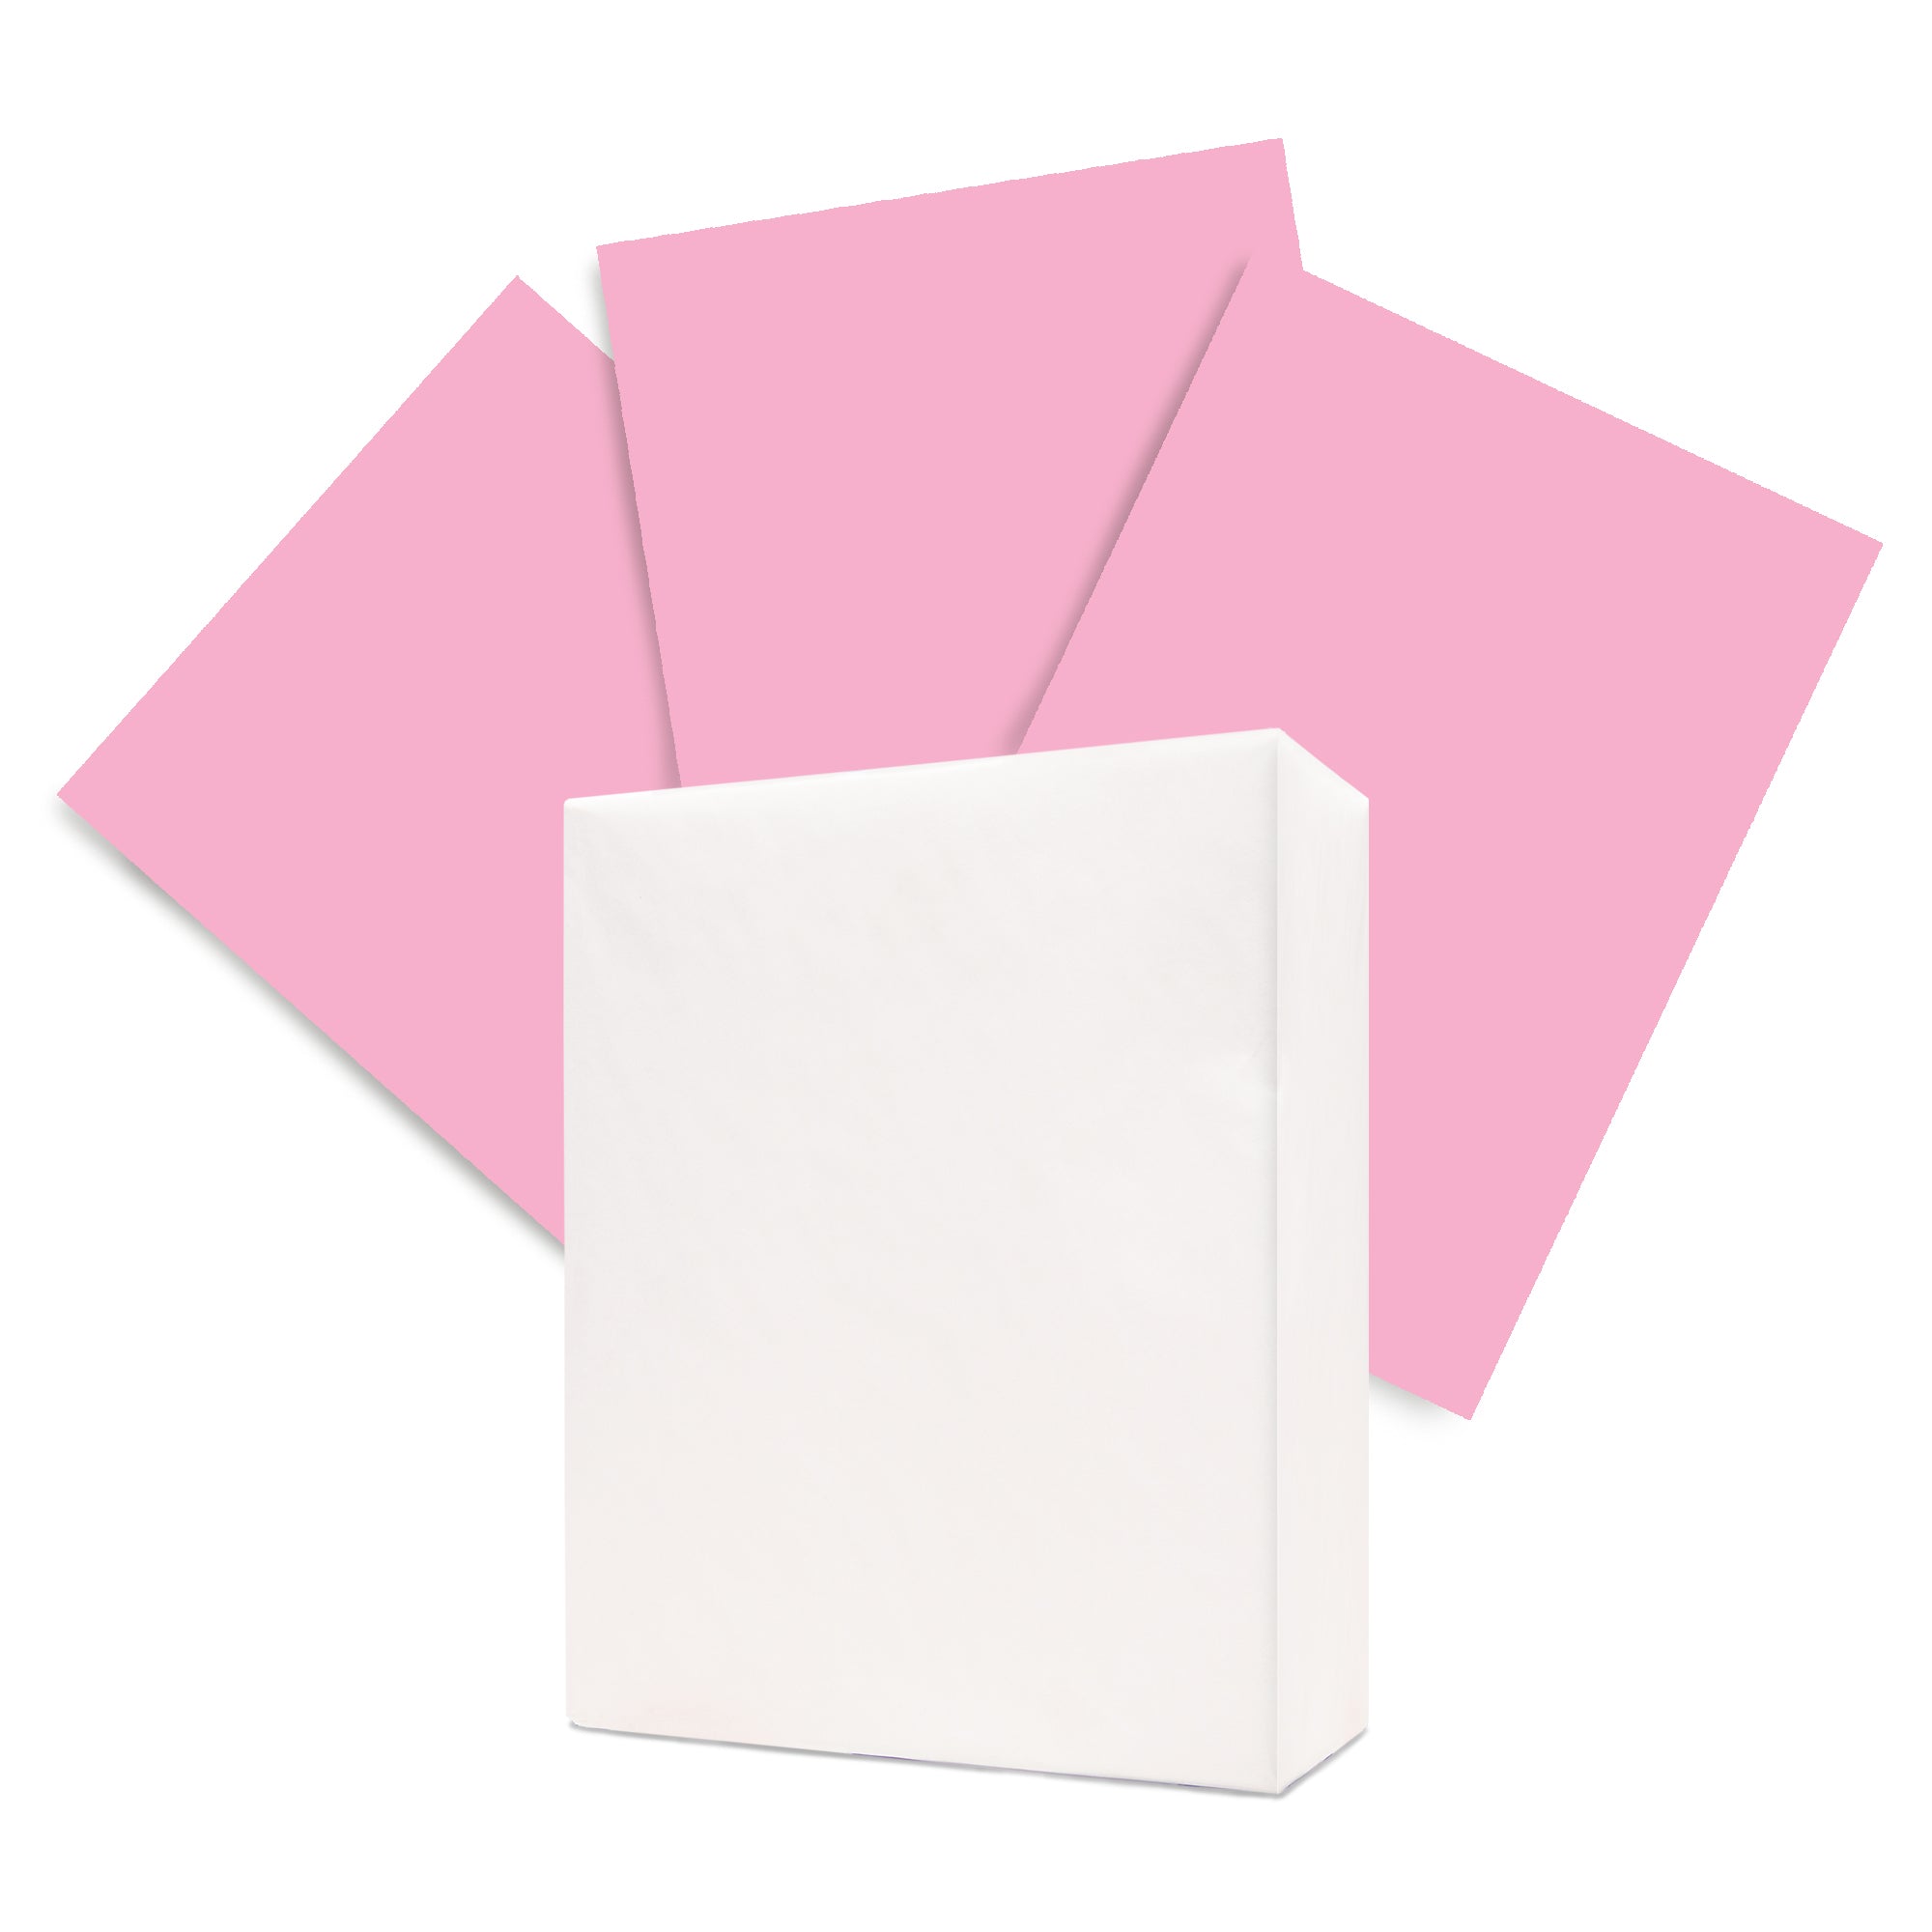 Pink Ice 8.5 x 14 Menu Size Stationery Parchment Colored Regular Papers, Color Paper | 1 Ream of 100 Sheets